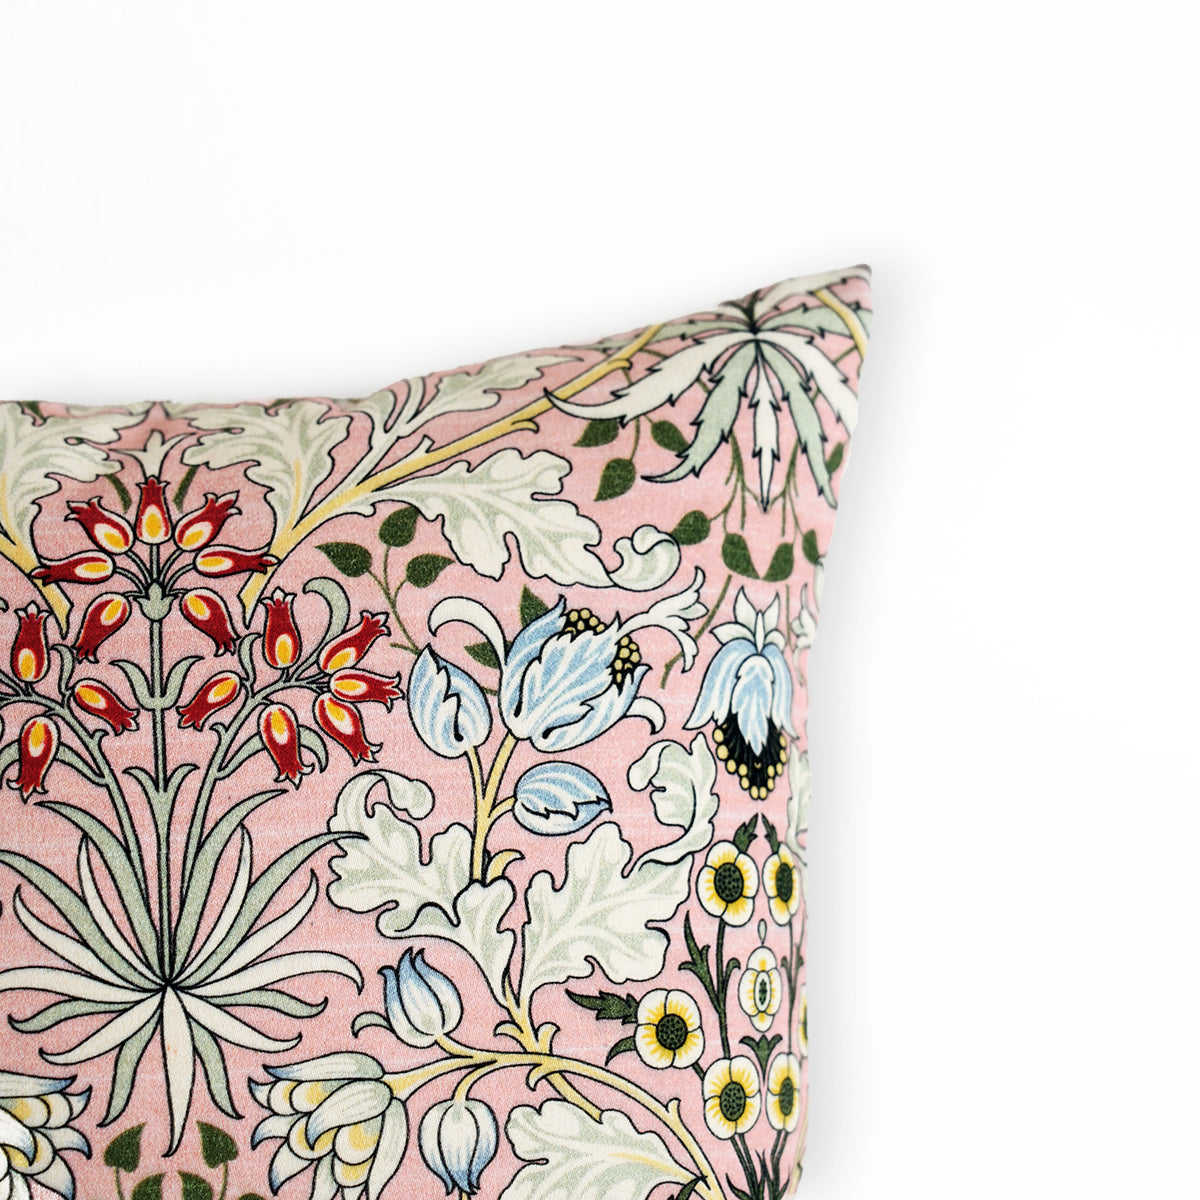 William Morris pillow cover, Old Rose Floral pattern, sizes available